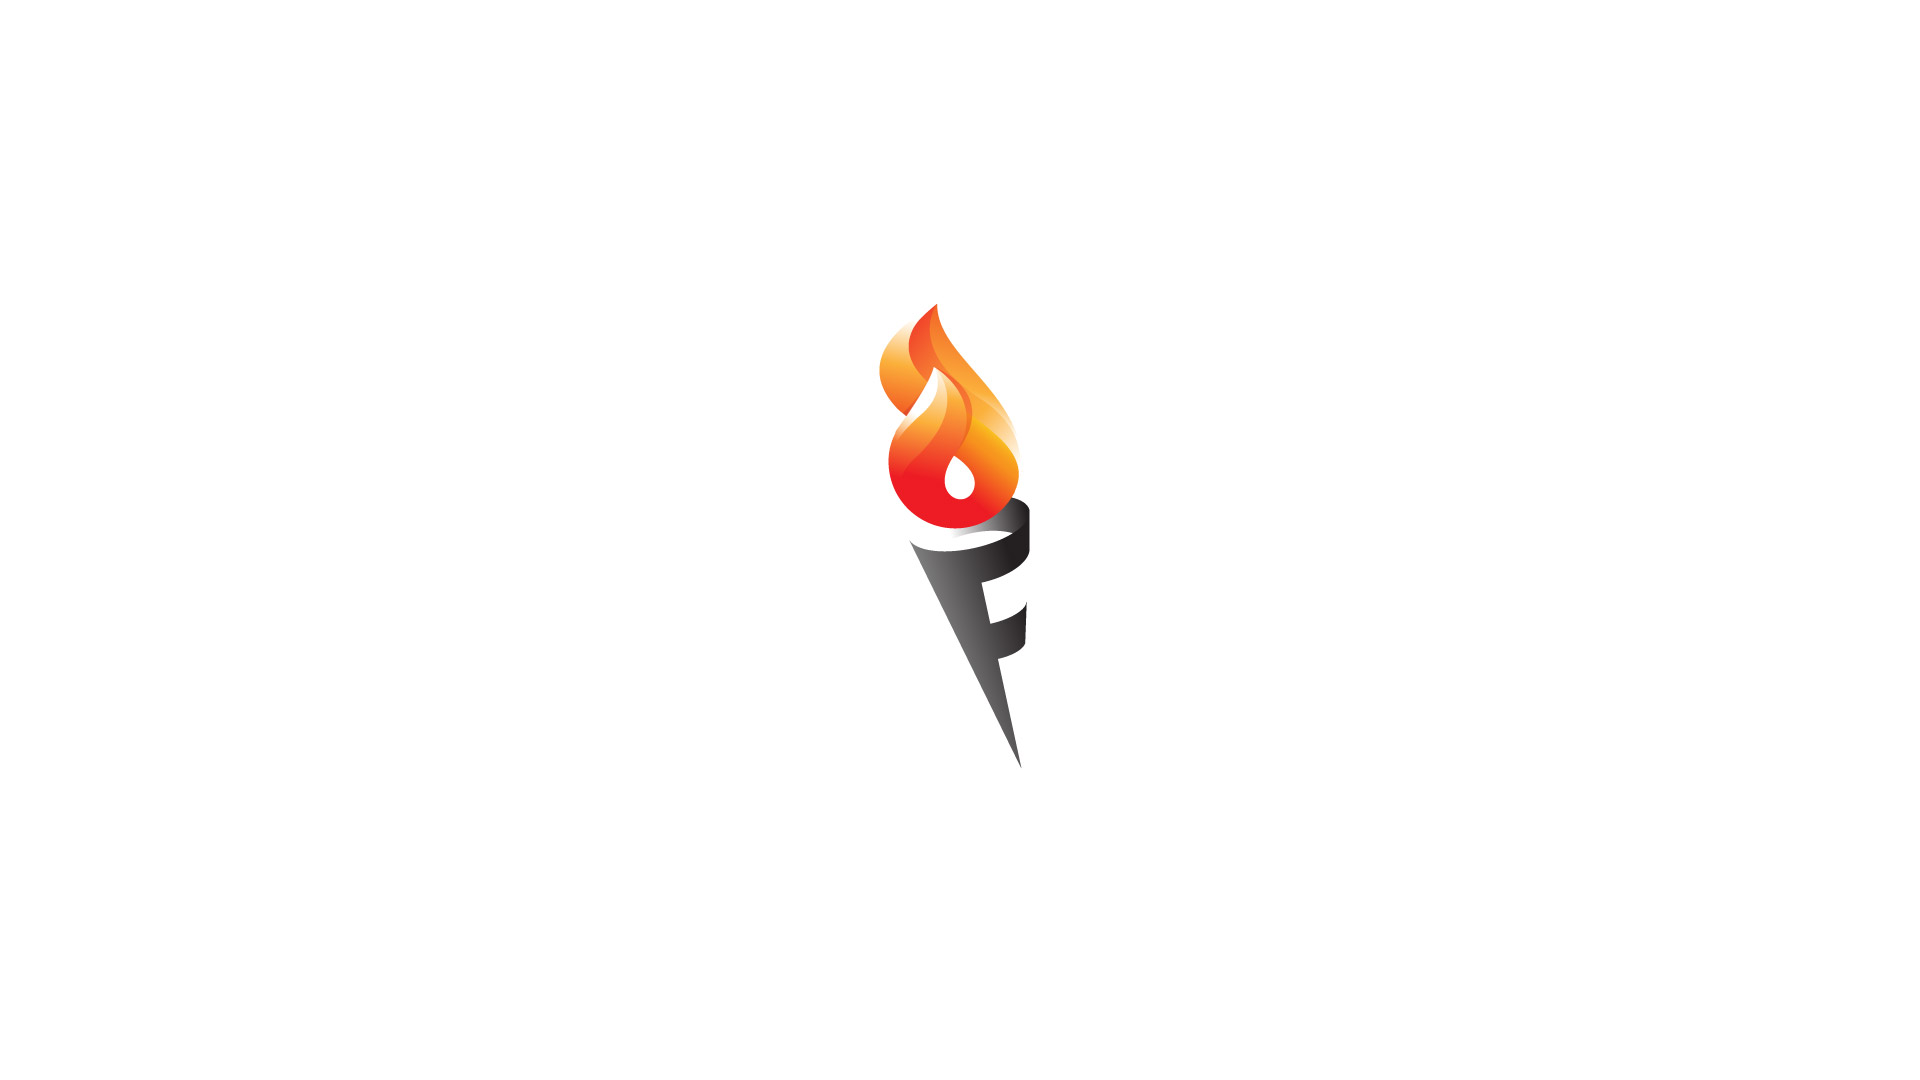 Fire torch and F - Logo inspiration